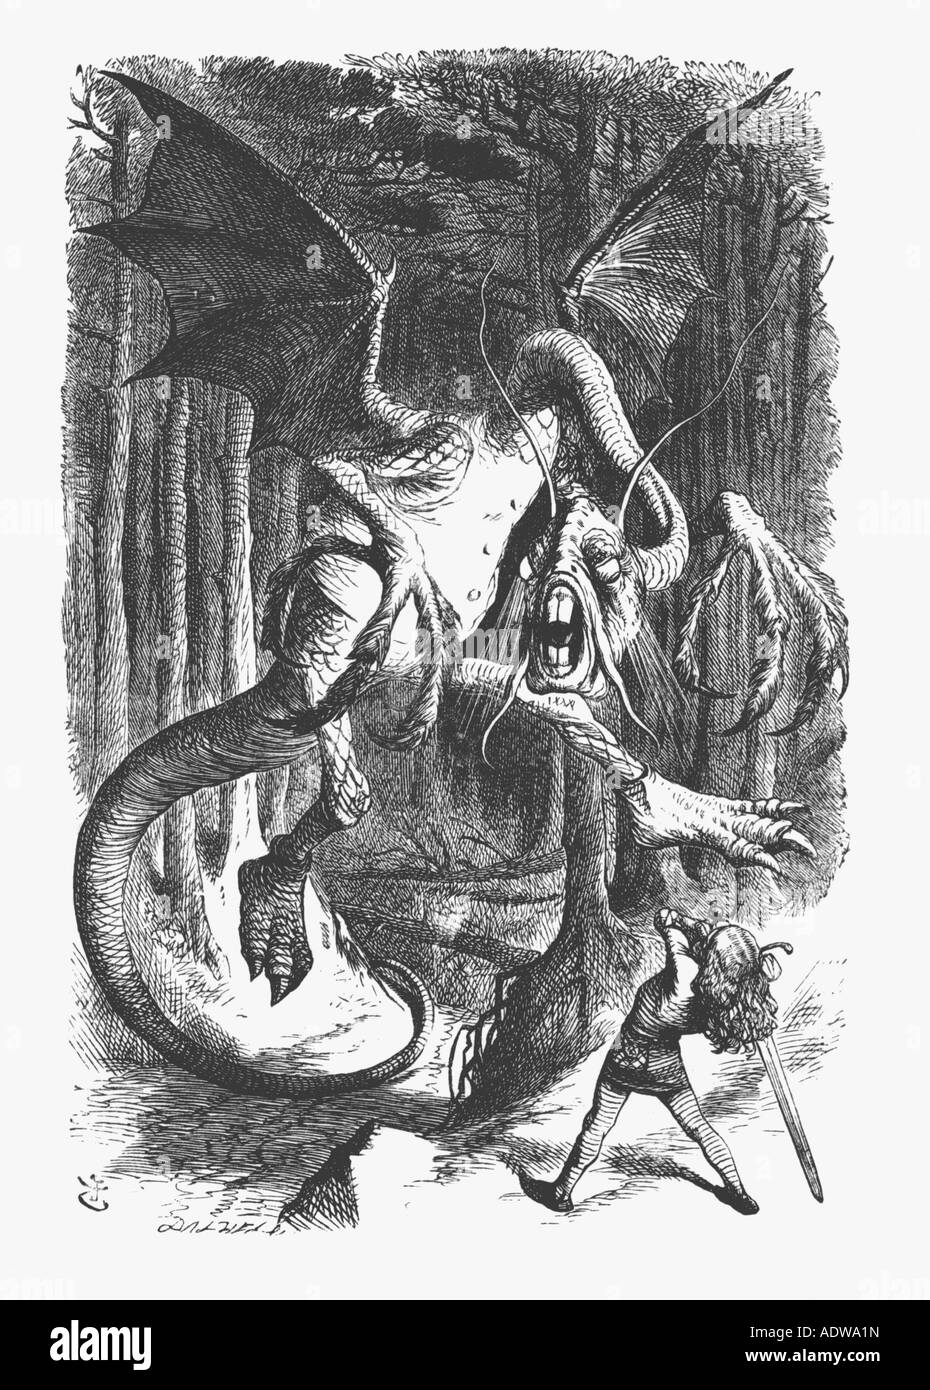 Illustration of the Jabberwock from Lewis Carroll s Alice Through the Looking Glass by John Tenniel Stock Photo